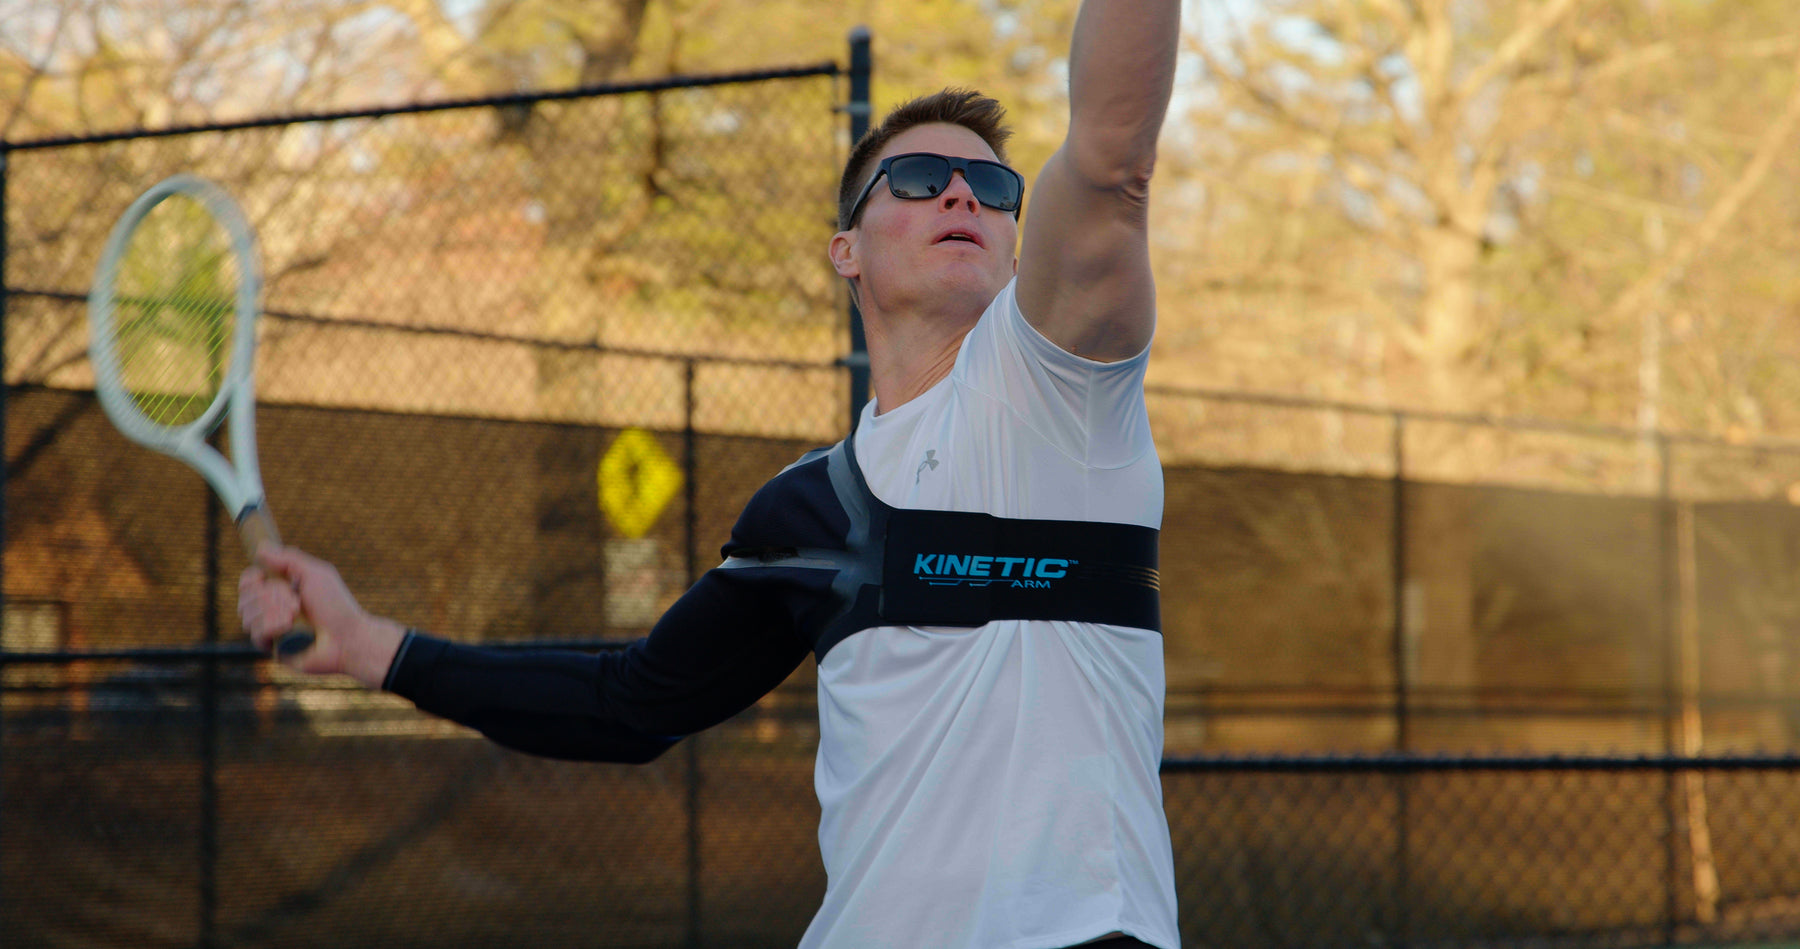 tennis player serving on court wearing K2 sleeve 